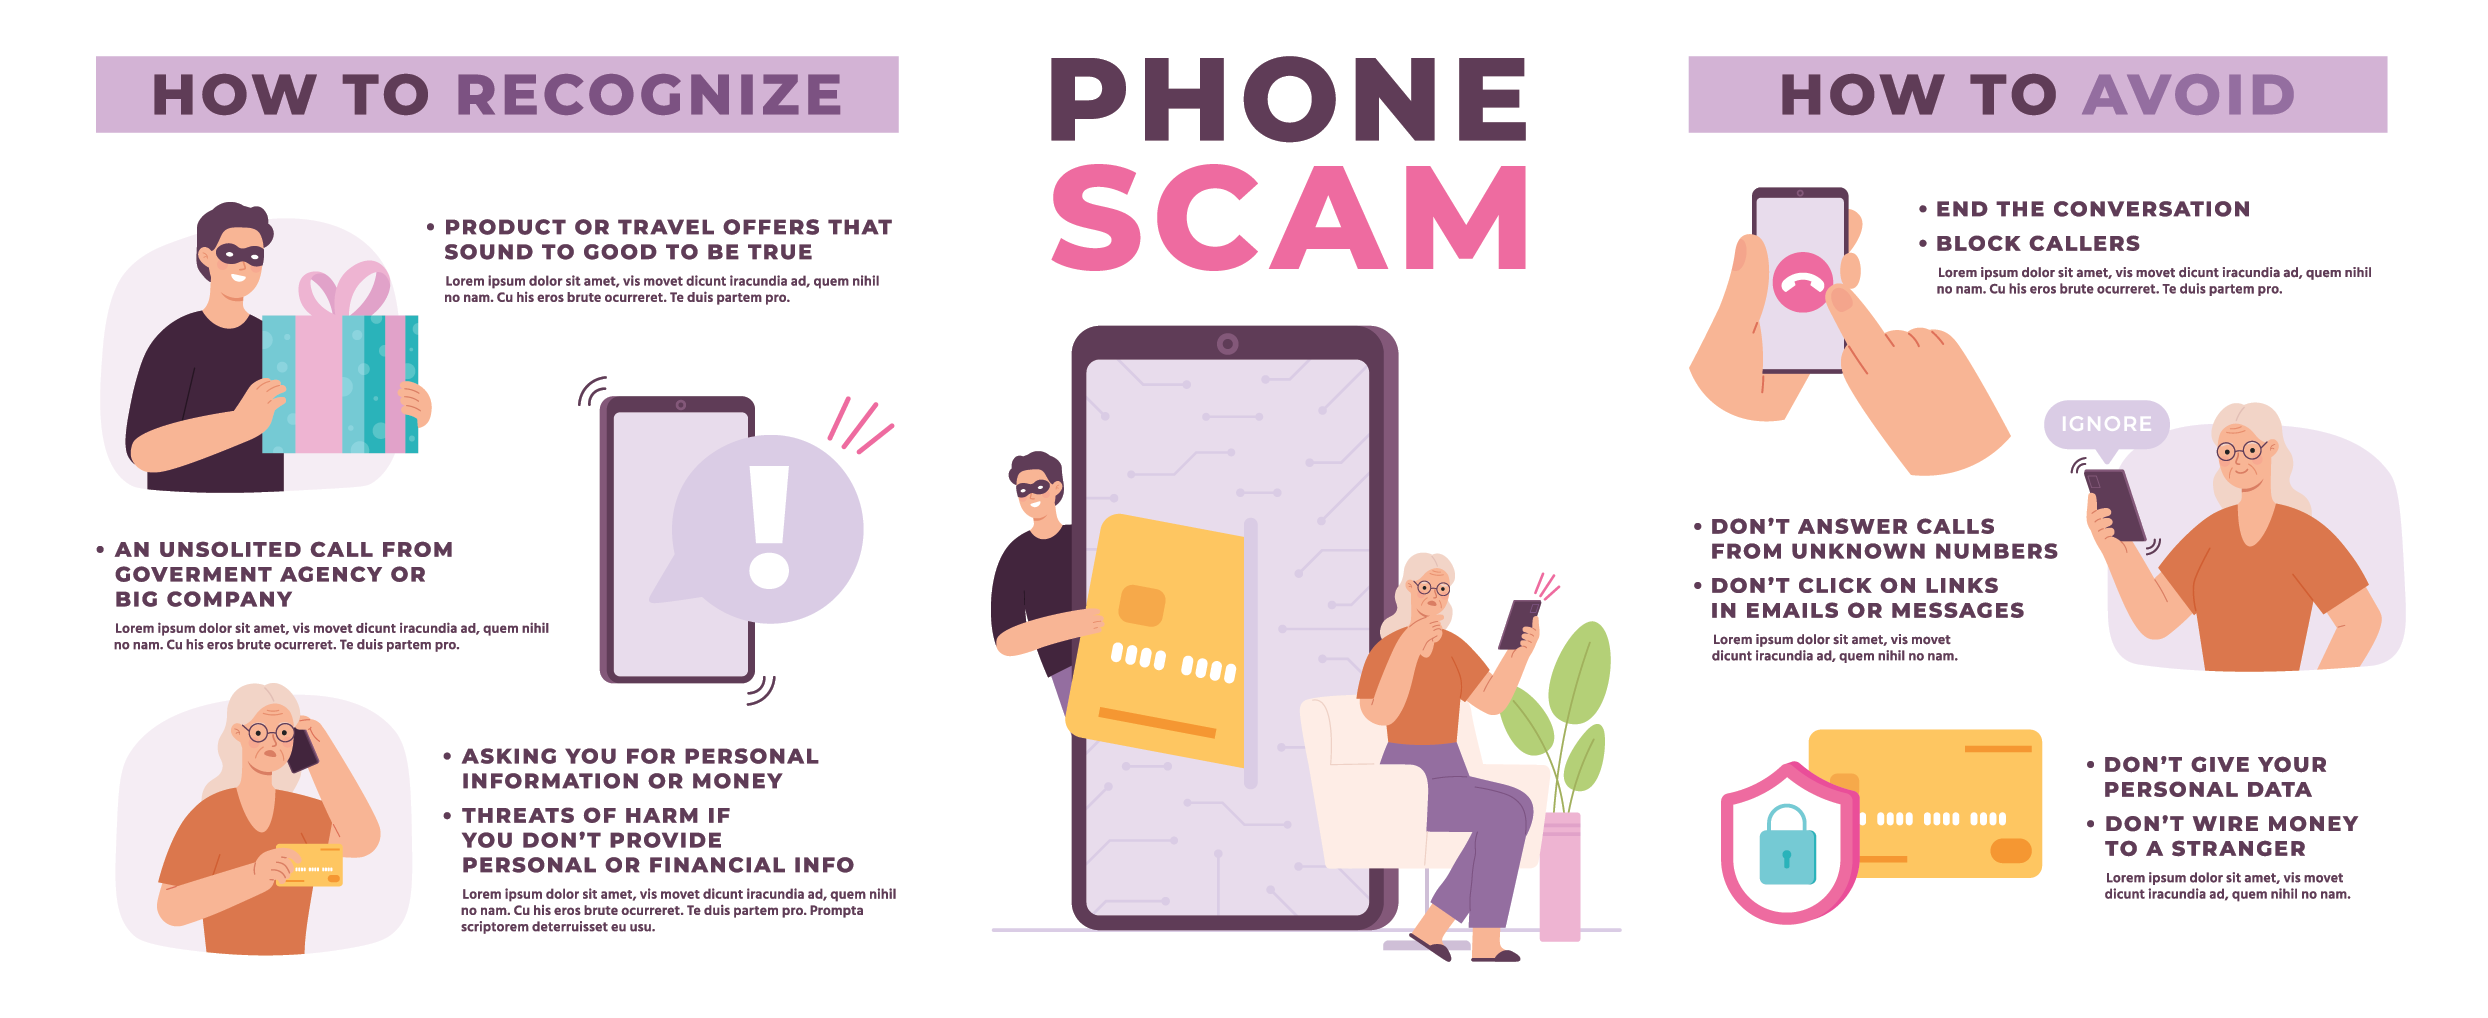 Tips to avoid be scammed by phone